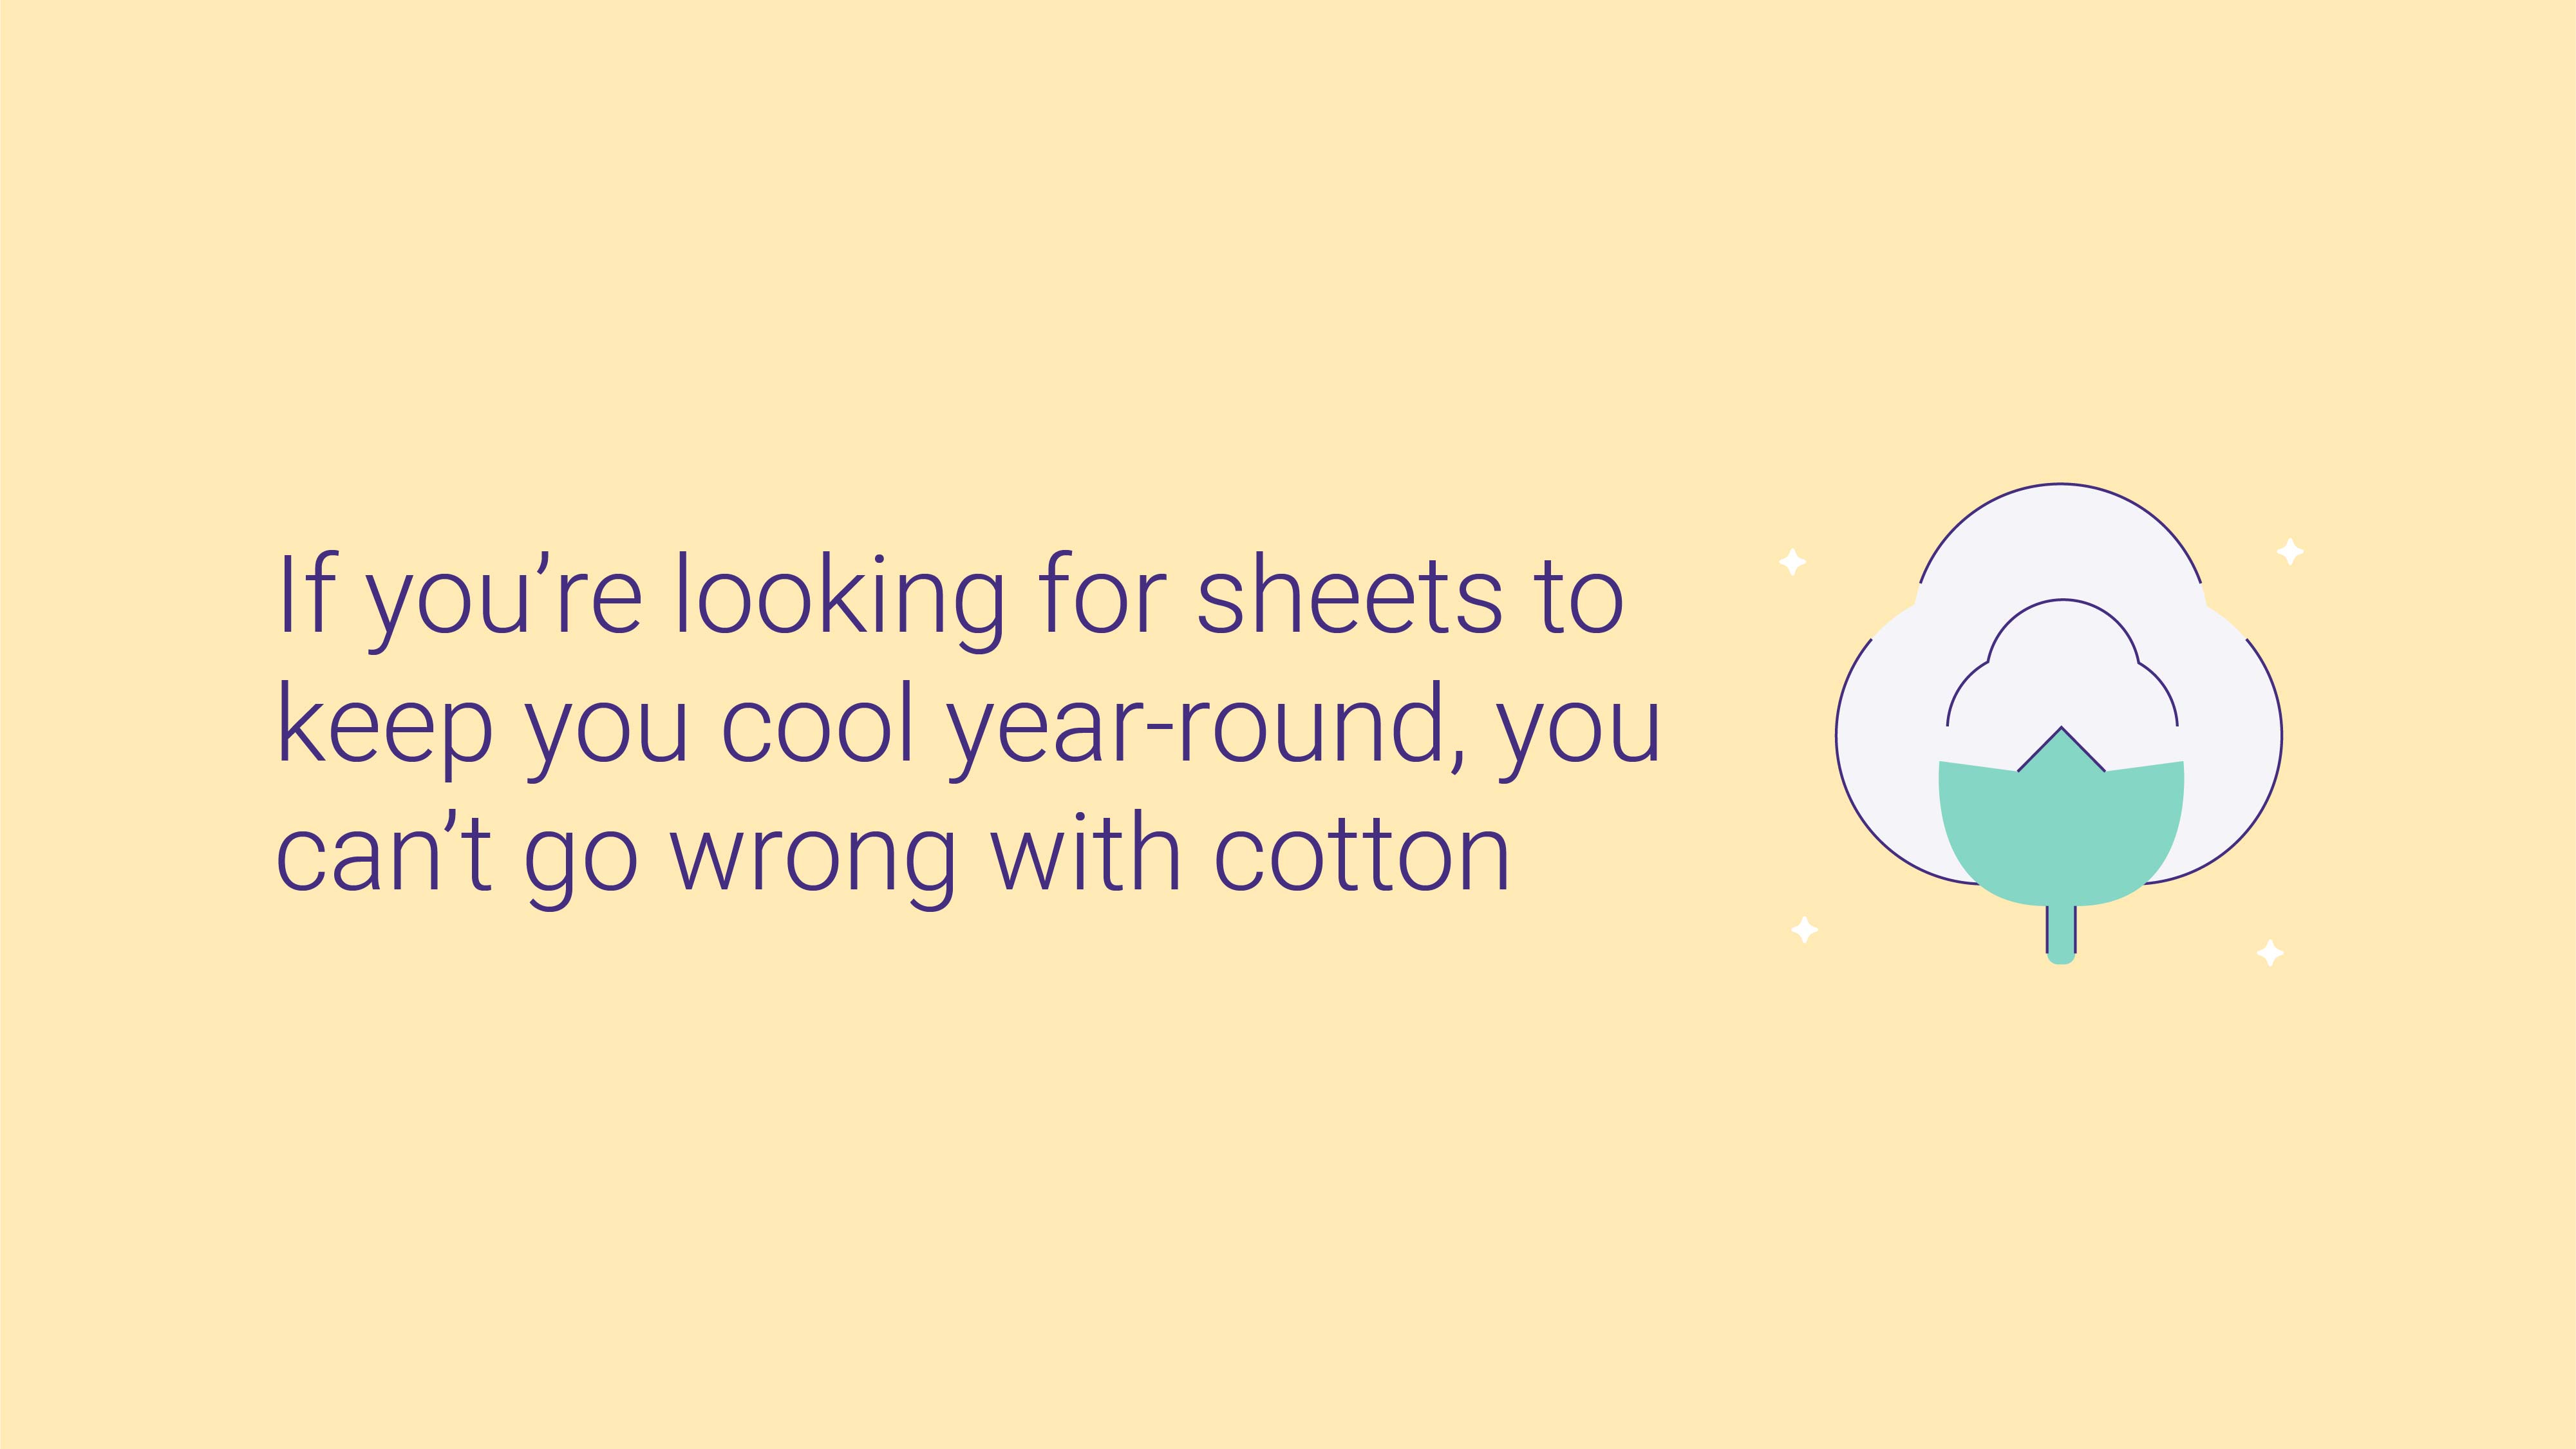 Best Sheets for Hot Sleepers